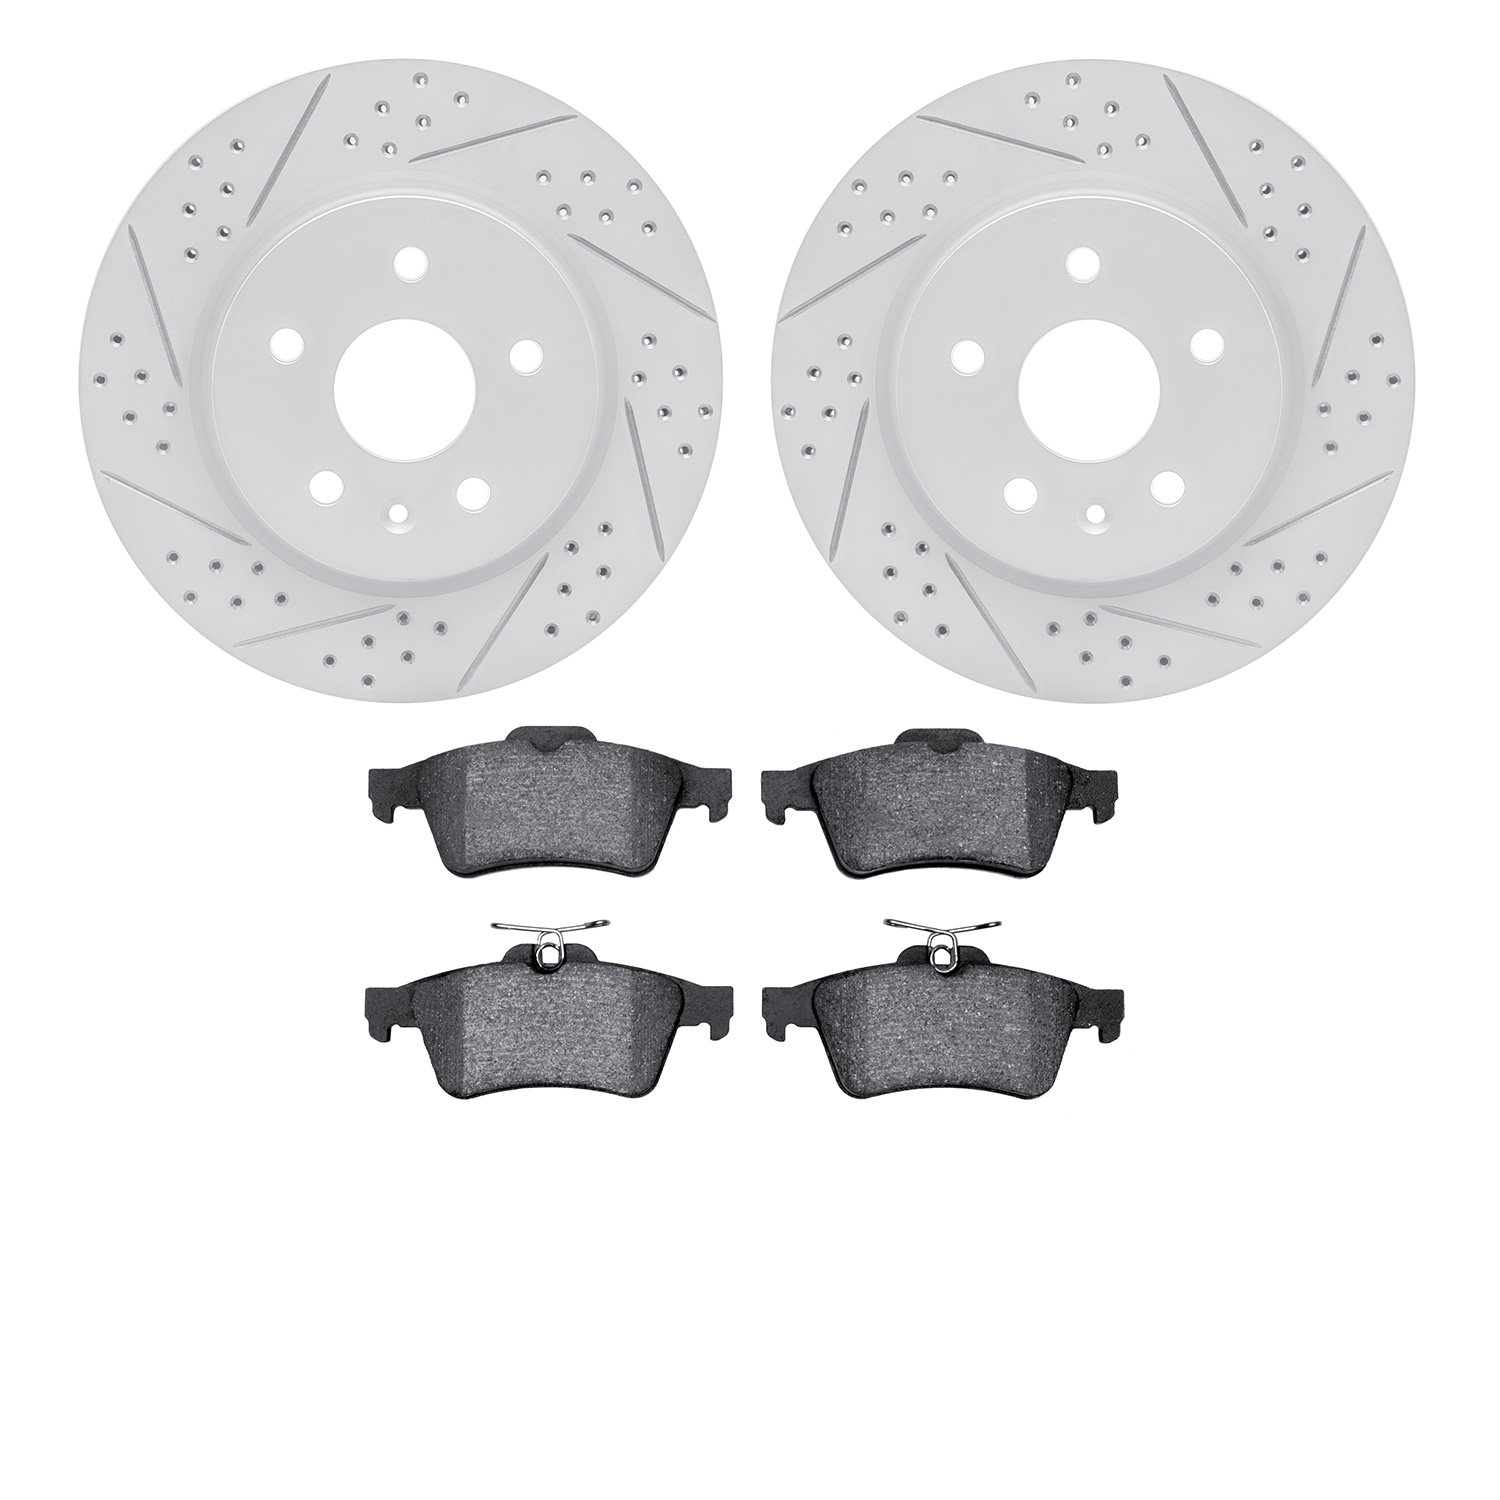 2502-65024 Geoperformance Drilled/Slotted Rotors w/5000 Advanced Brake Pads Kit, Fits Select GM, Position: Rear